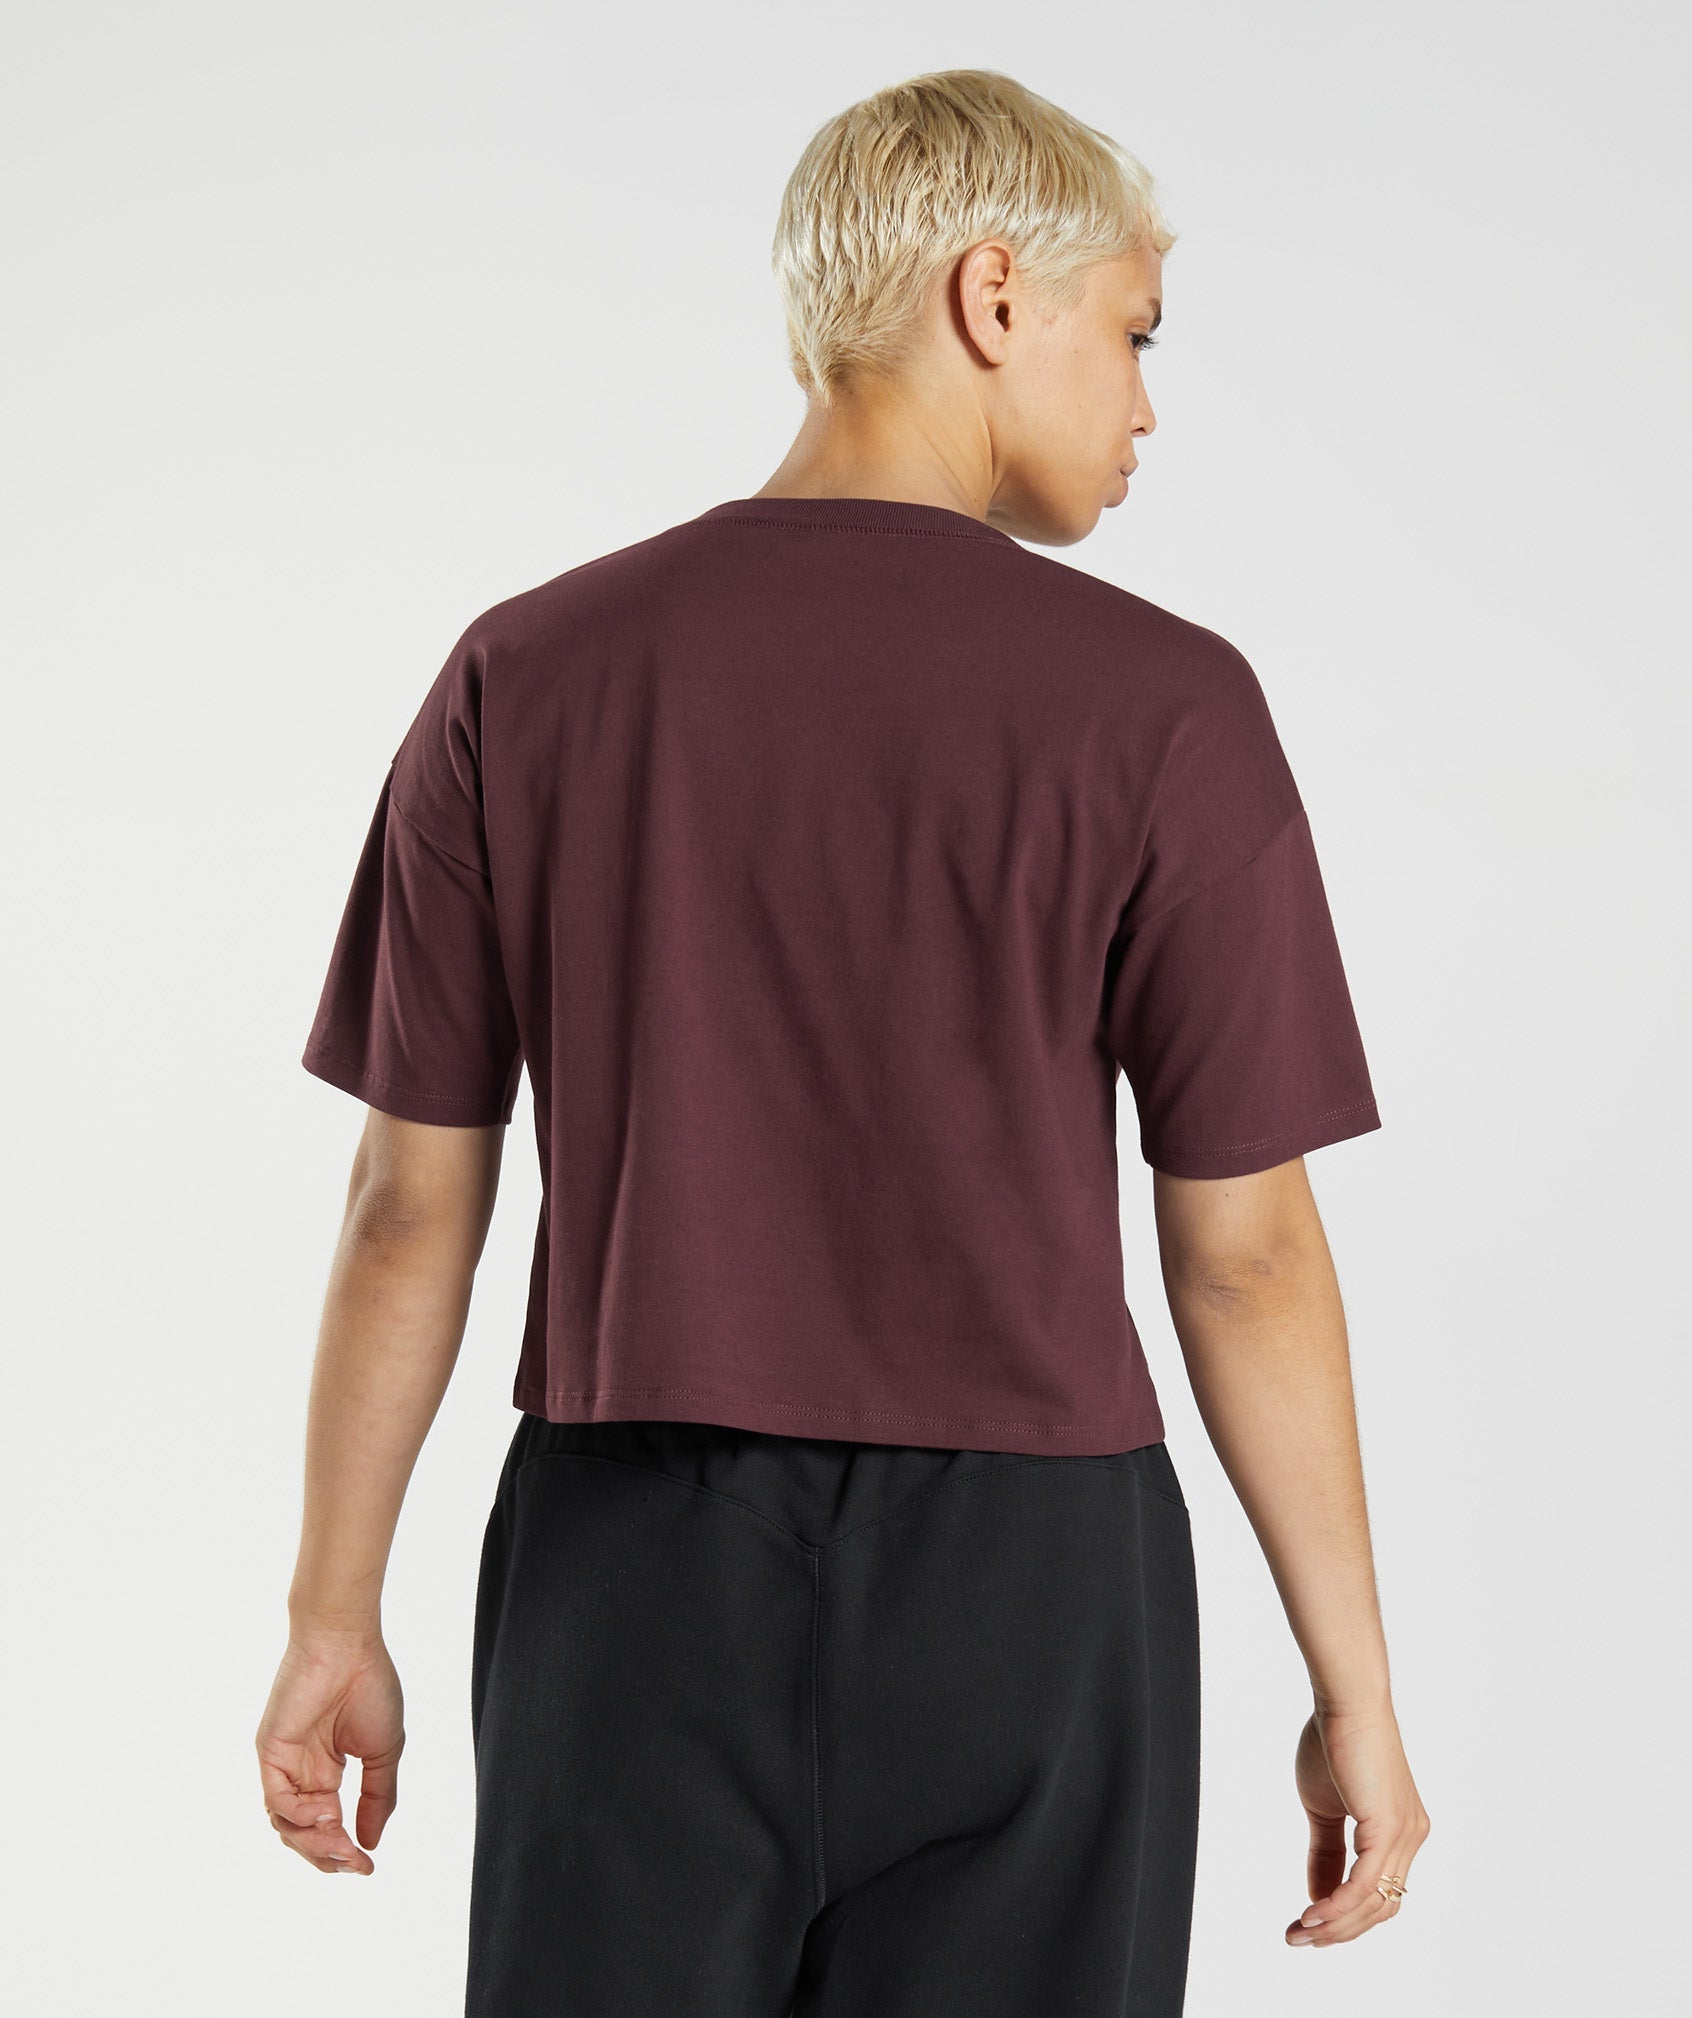 GS10 Year Midi Top in Baked Maroon